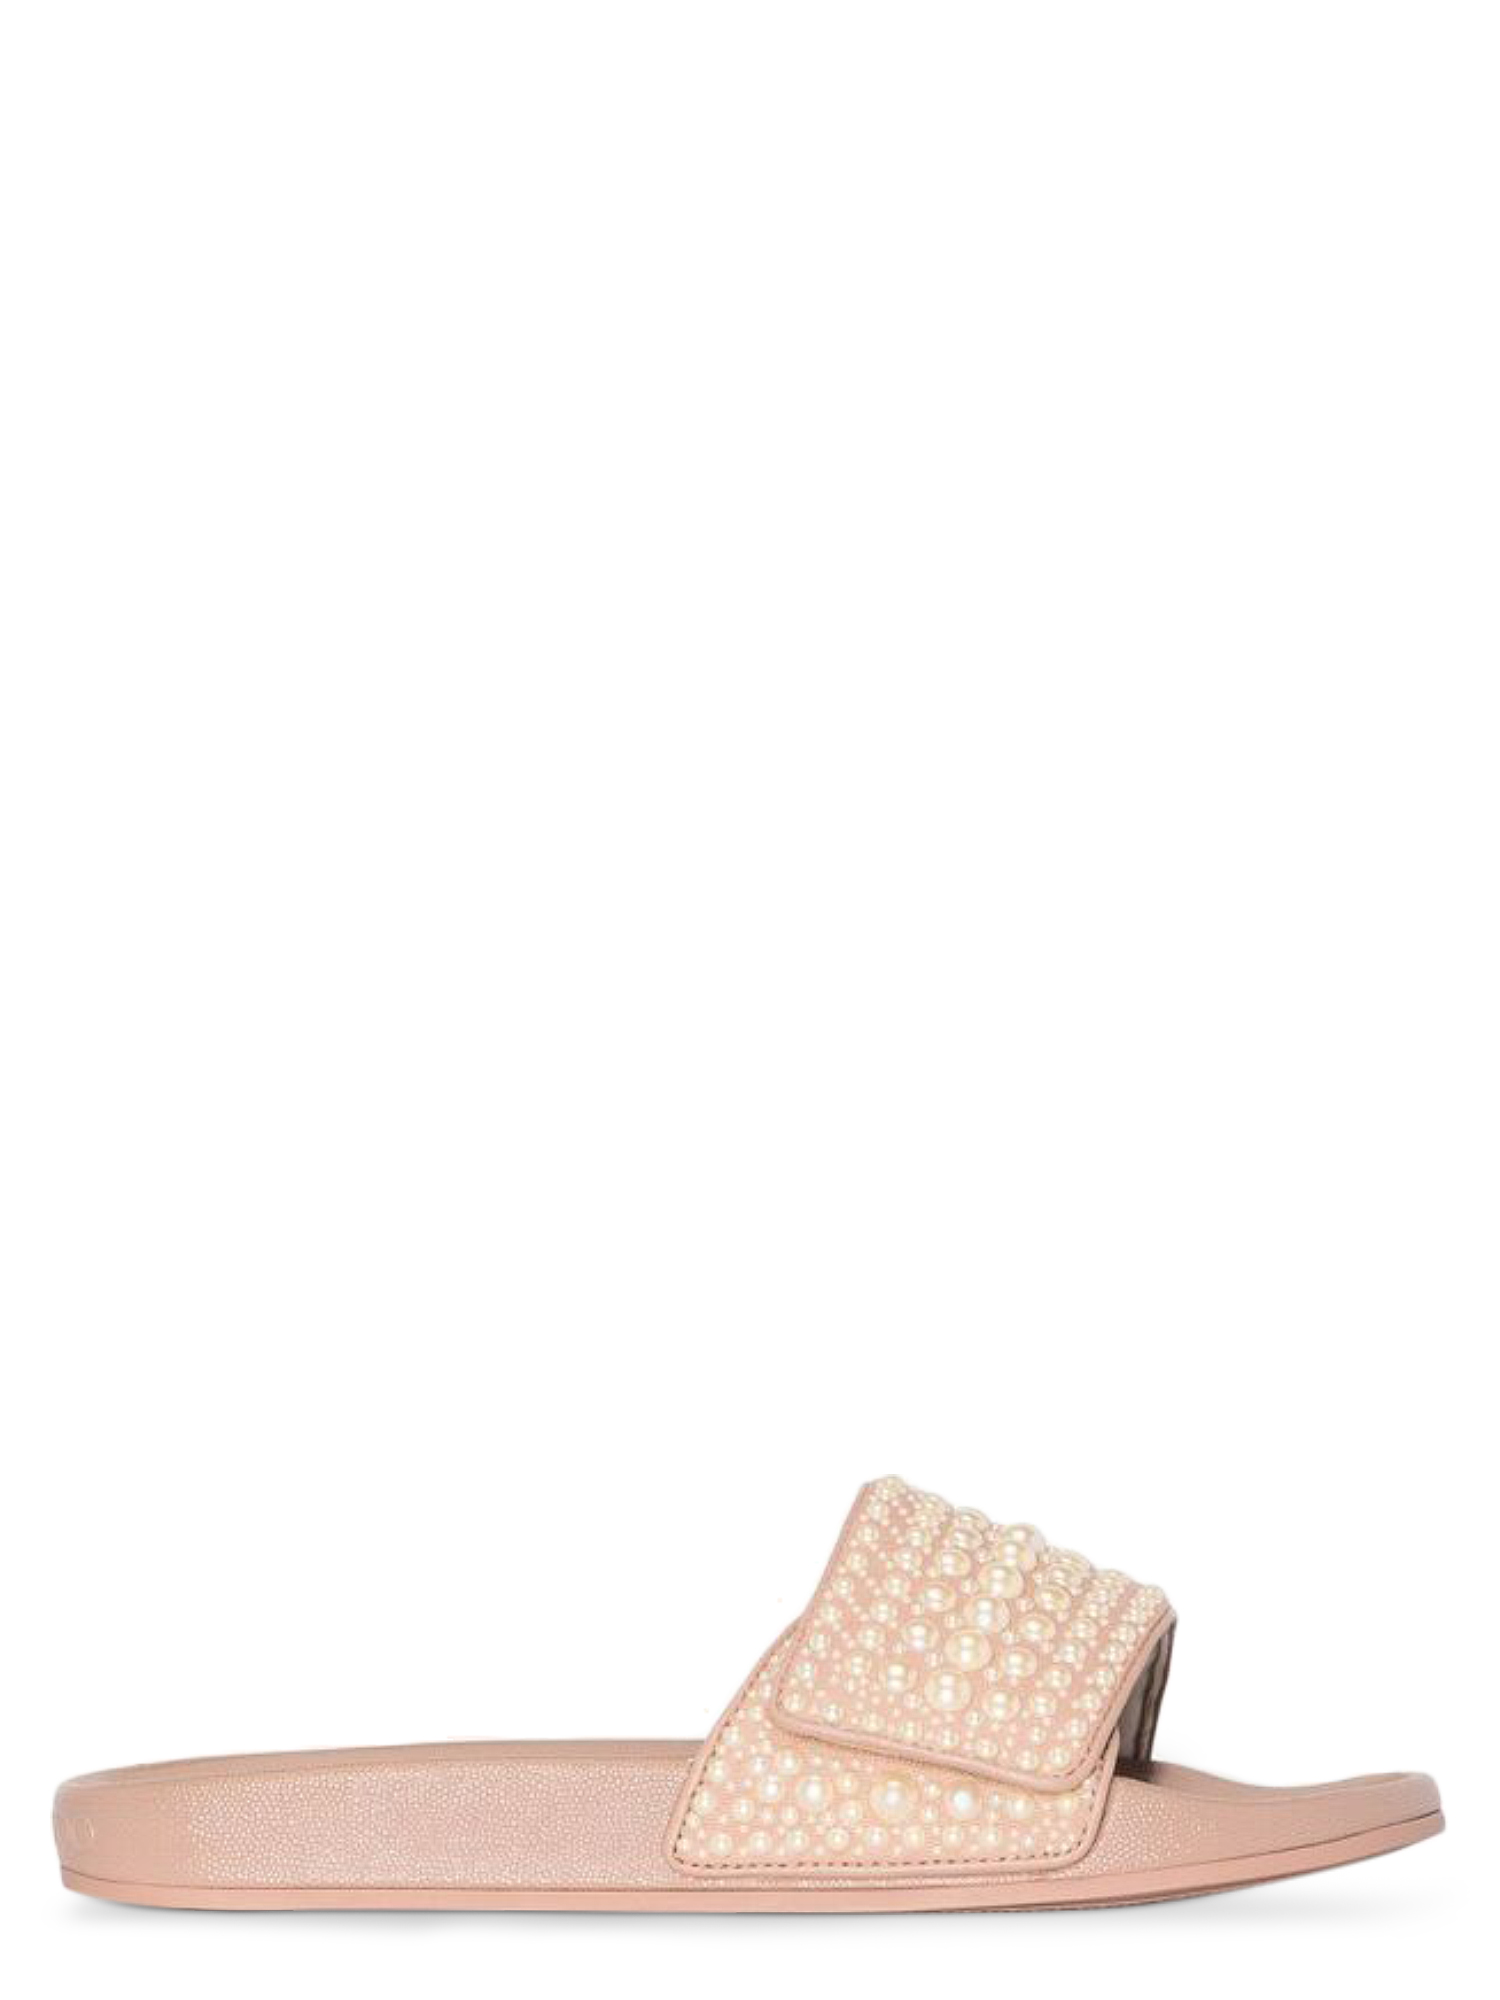 Jimmy Choo Femme Slippers Pink Leather